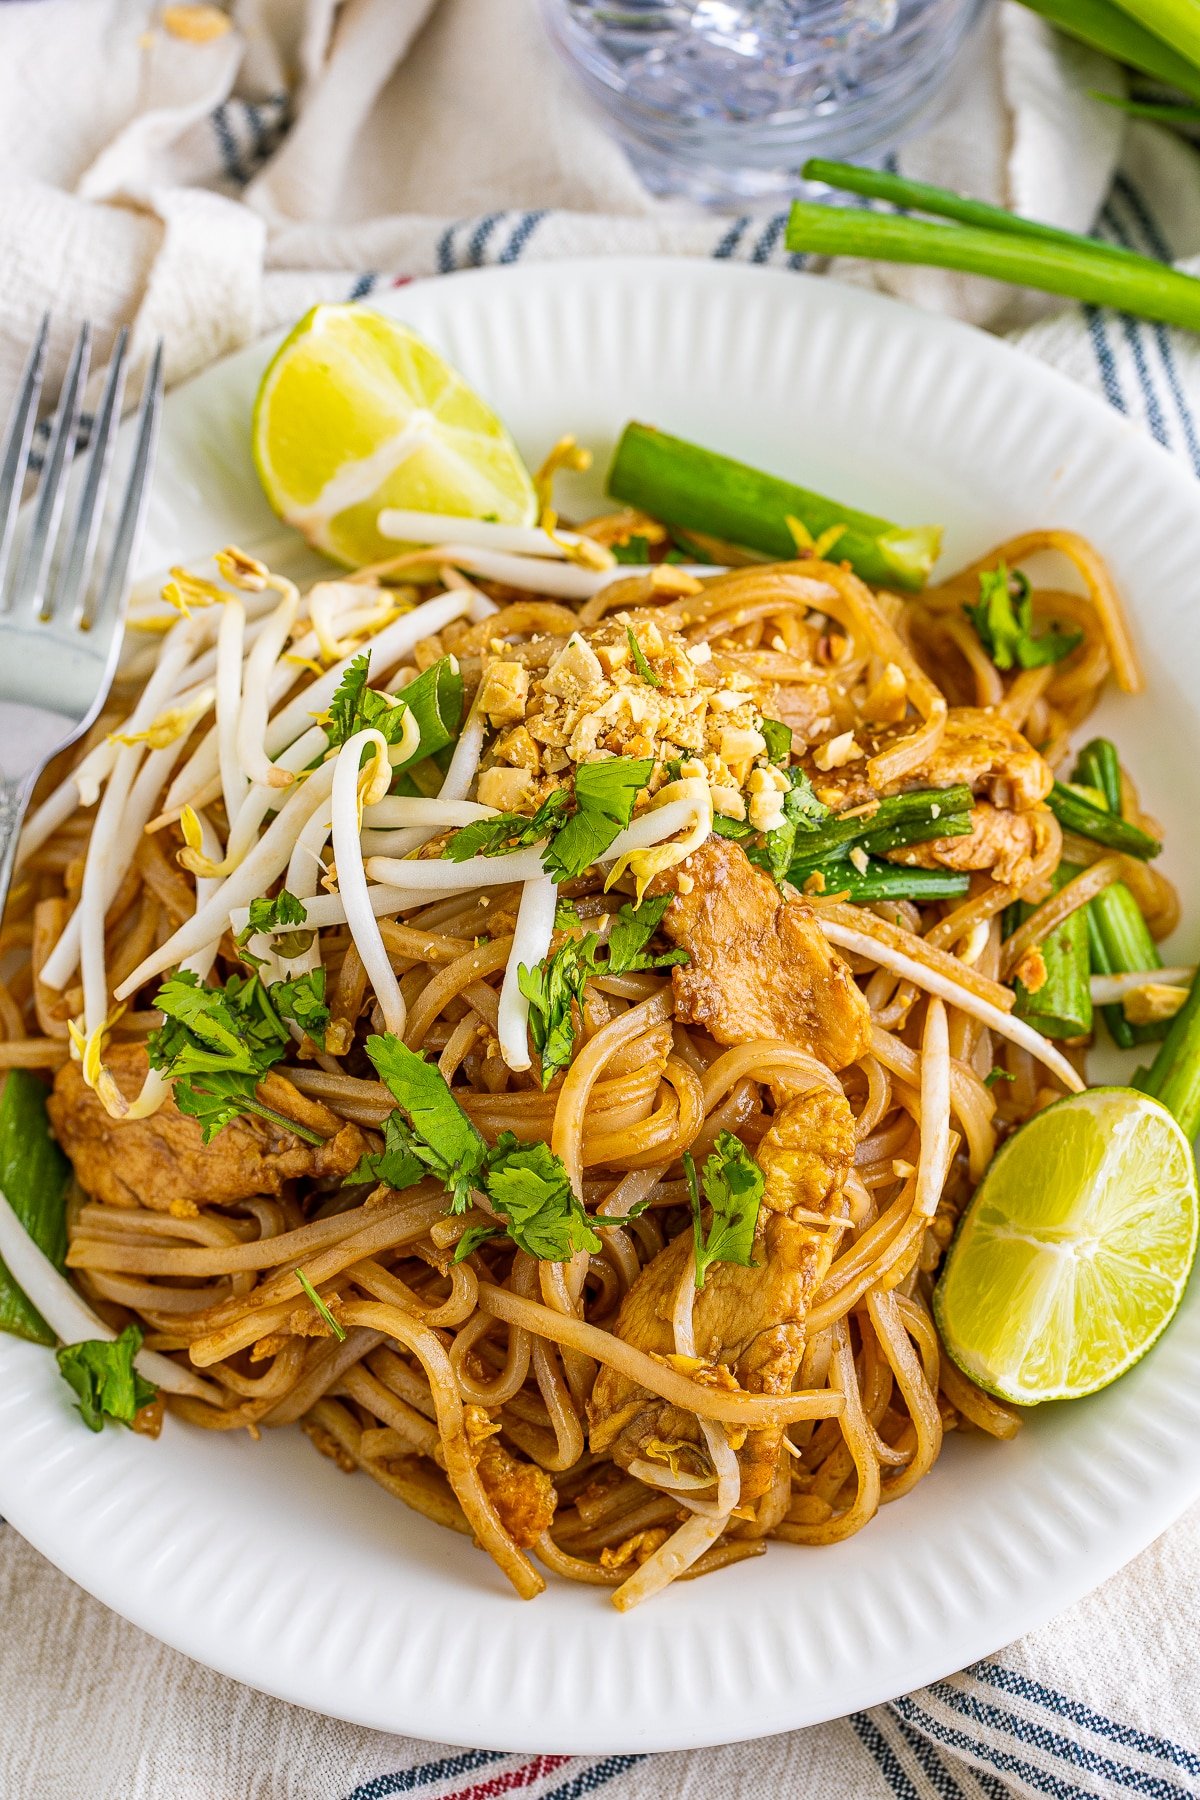 Overhead image showing spicy pad thai recipe on a white plate with silver fork, limes, and scallions